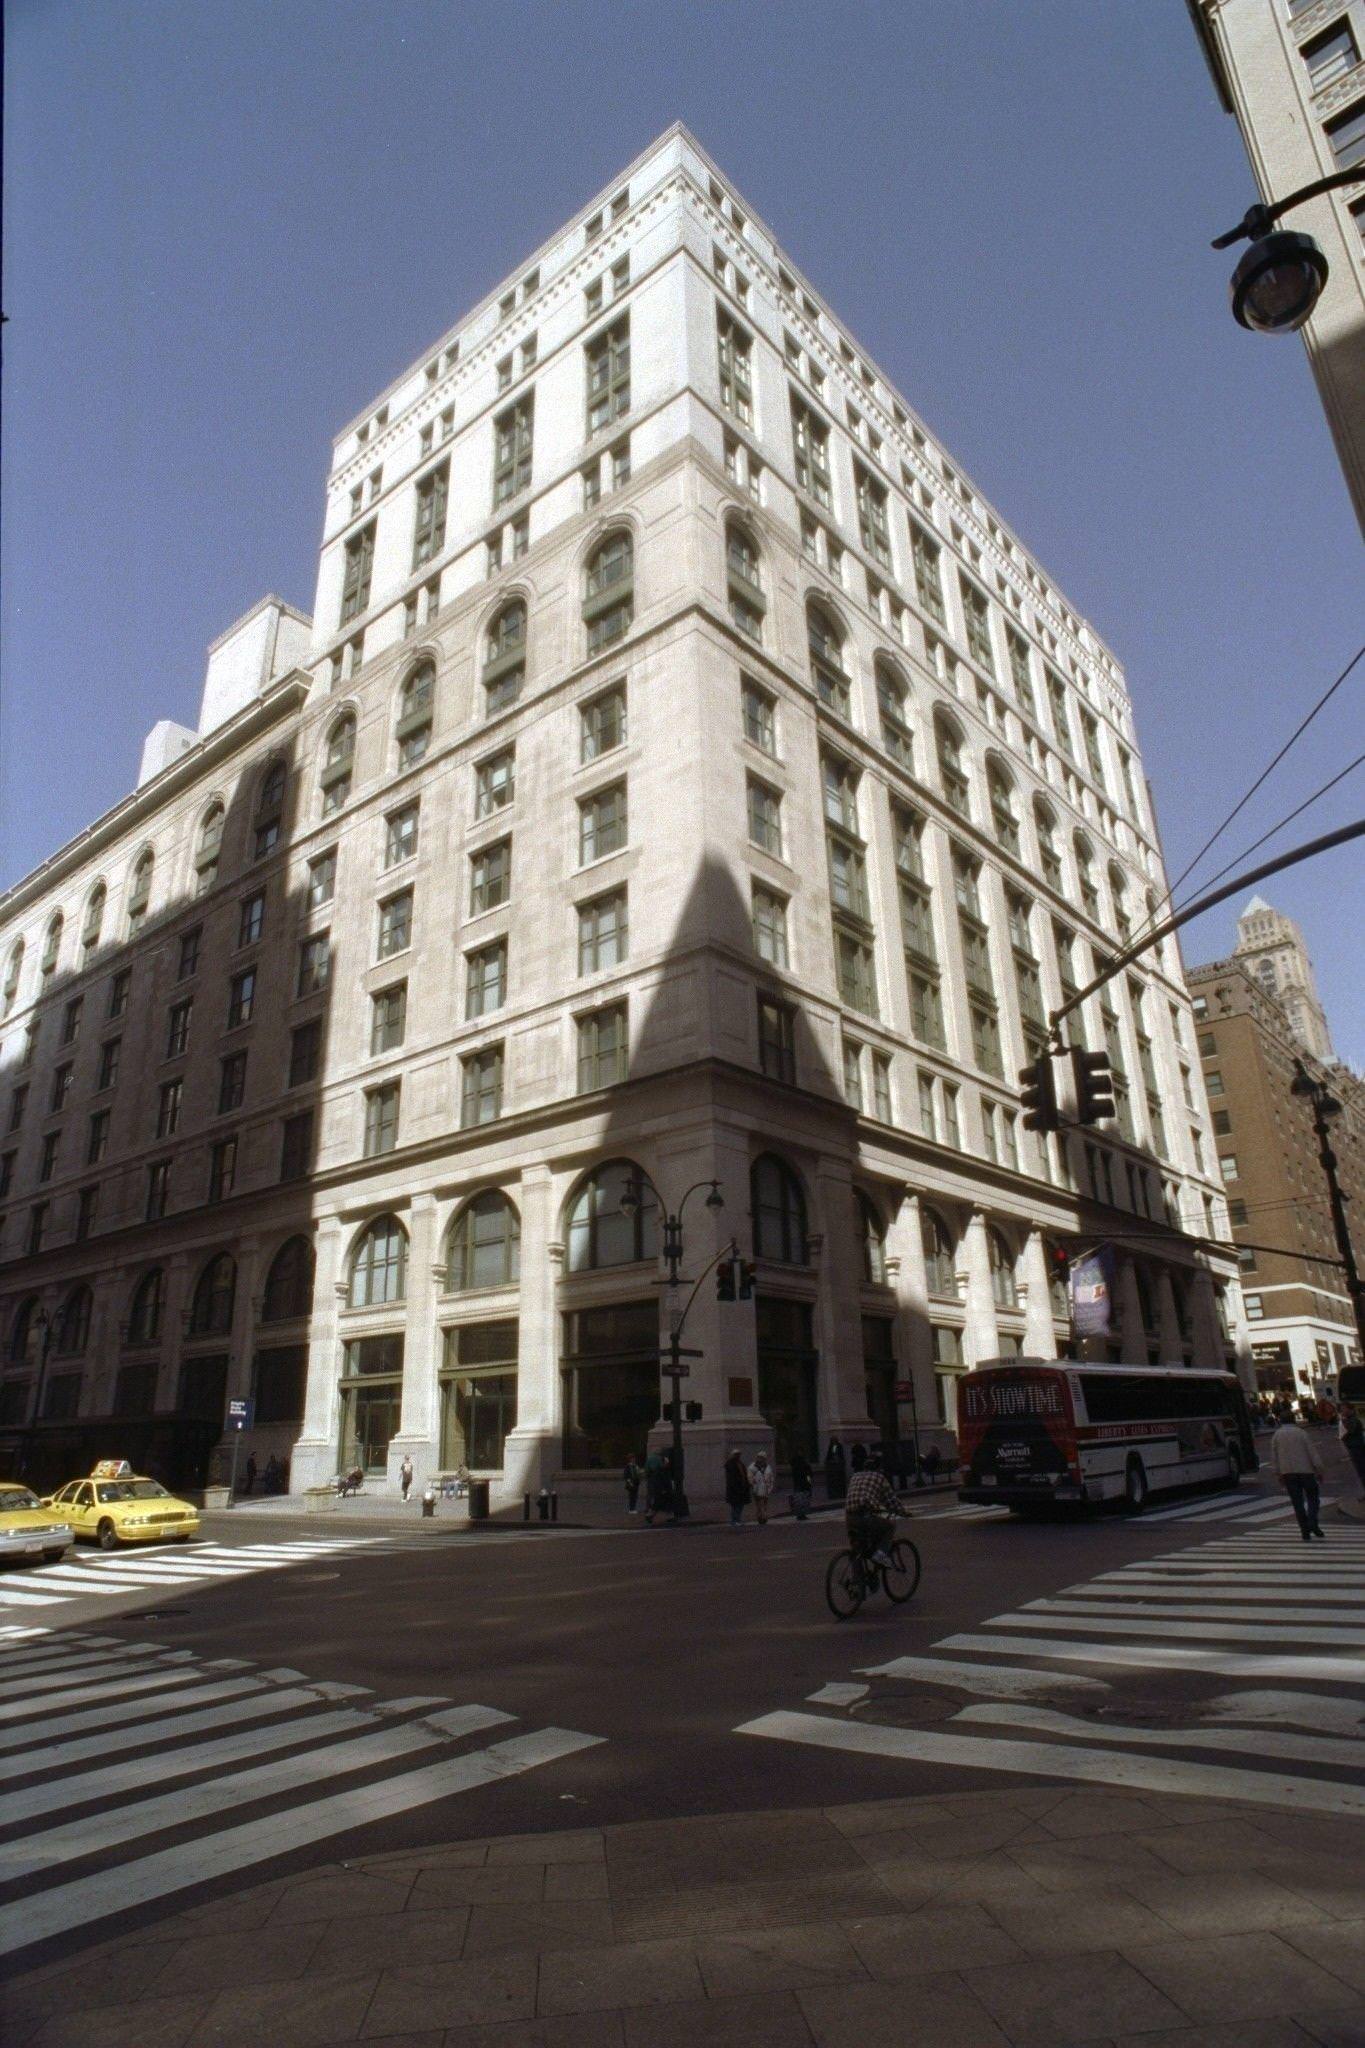 The Science And Business Library At 34Th St. And Madison Ave., Manhattan, 1997